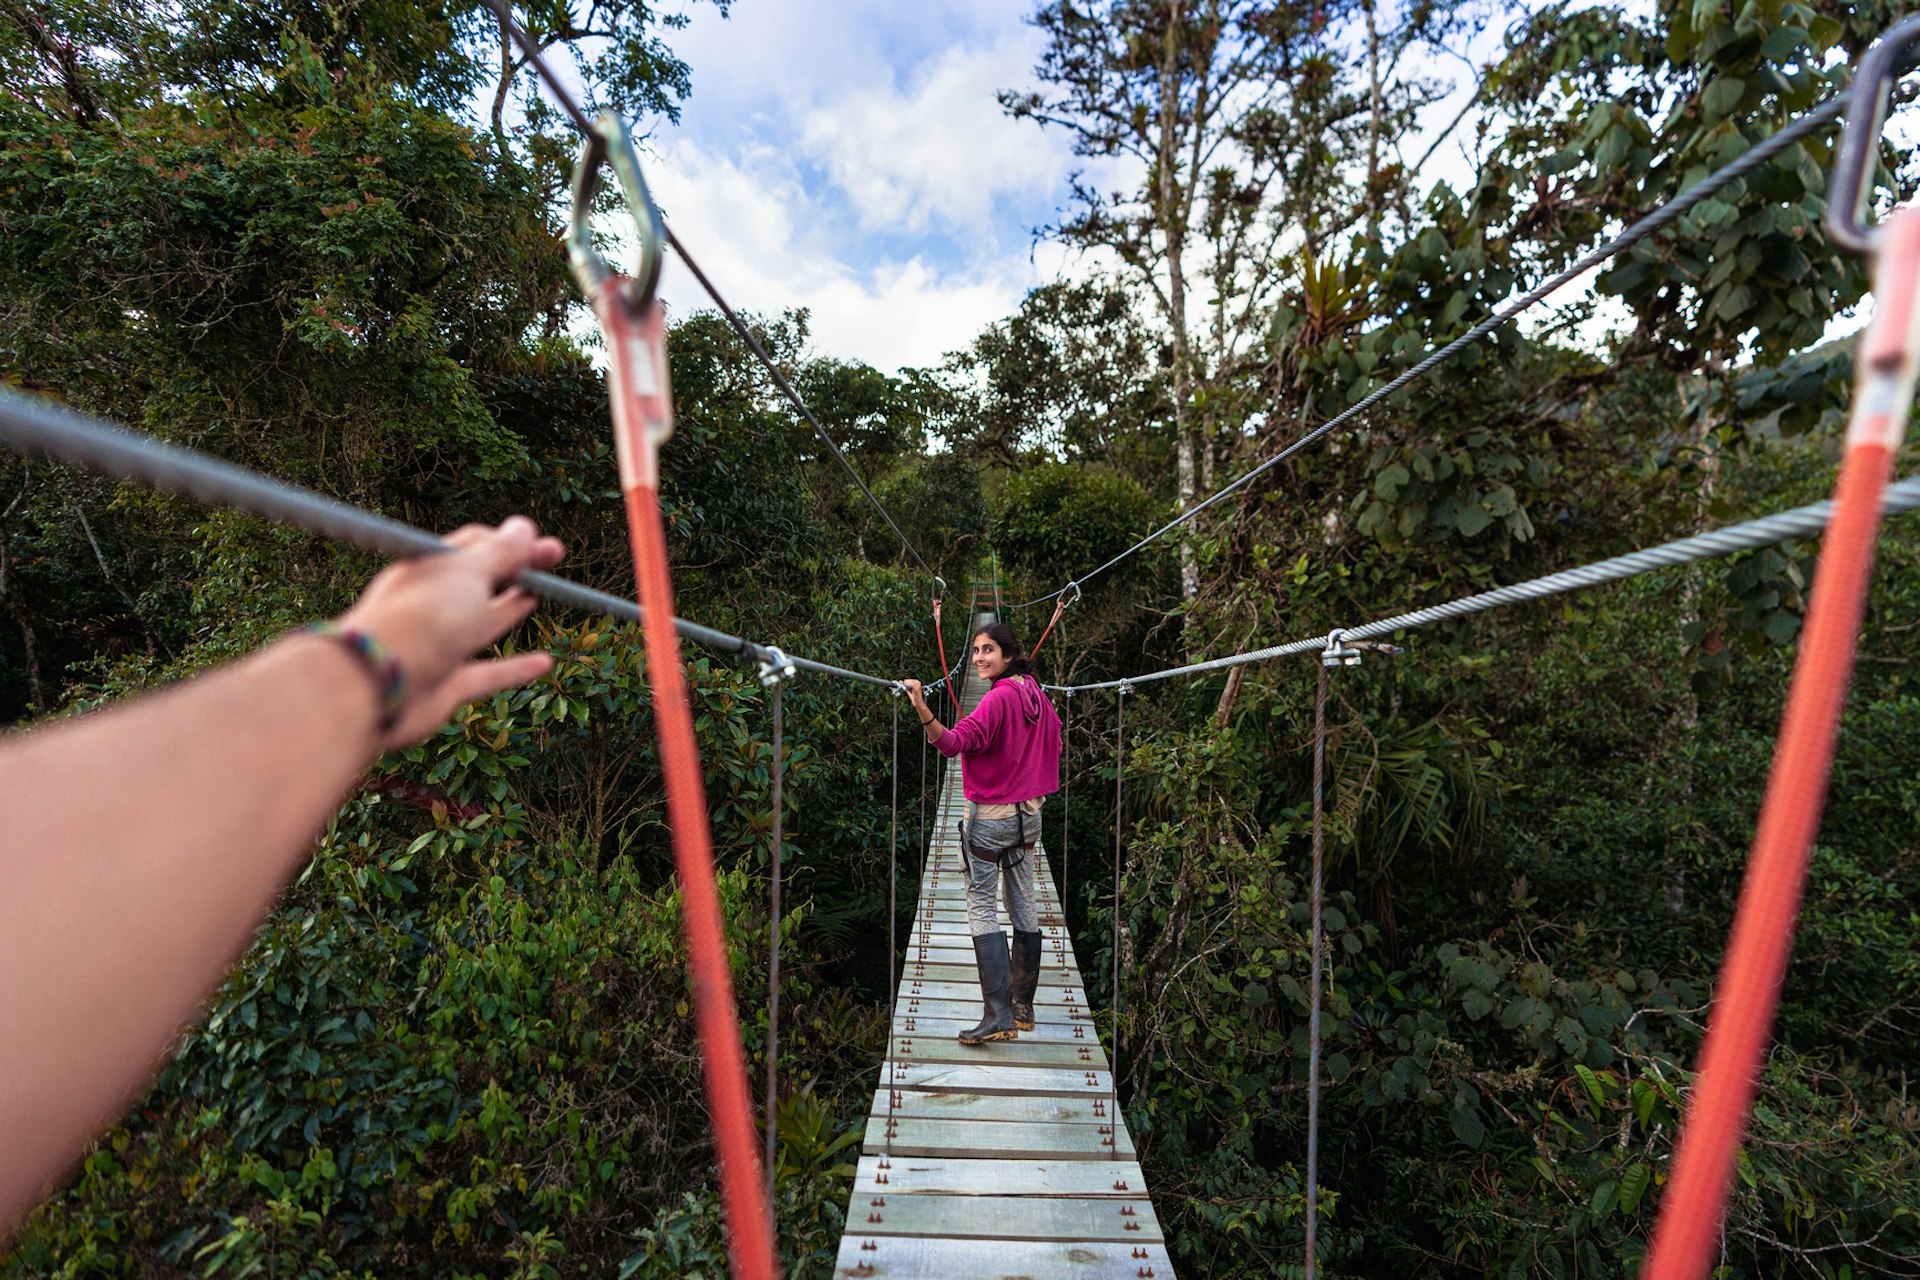 A woman crosses a hanging rope bridge in Costa Rica, Central America